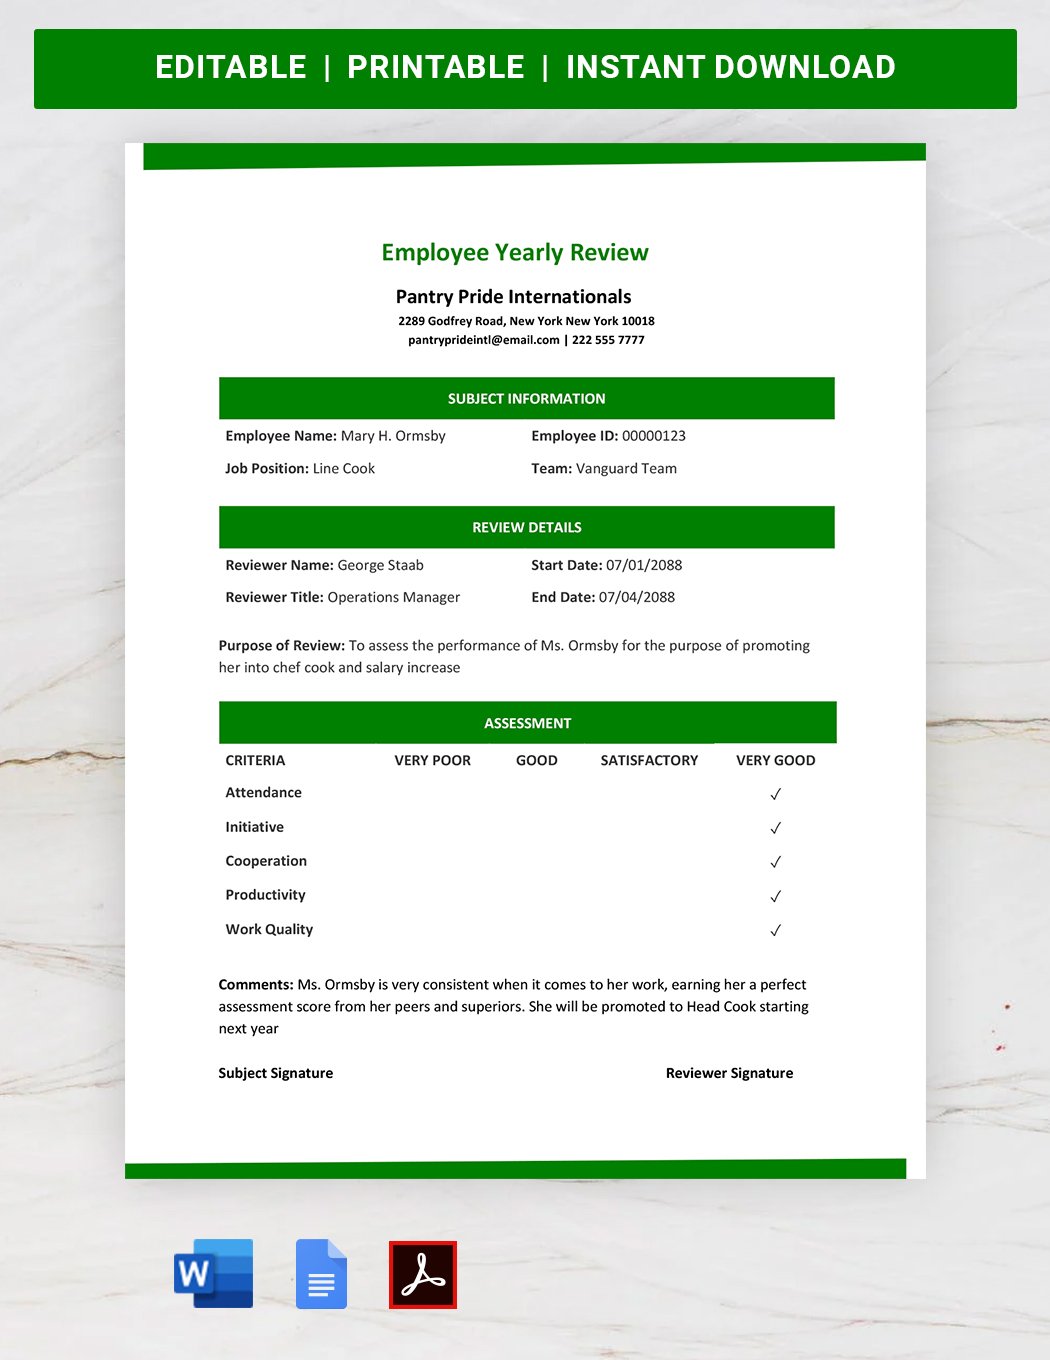 Free Employee Yearly Review Template in Word, Google Docs